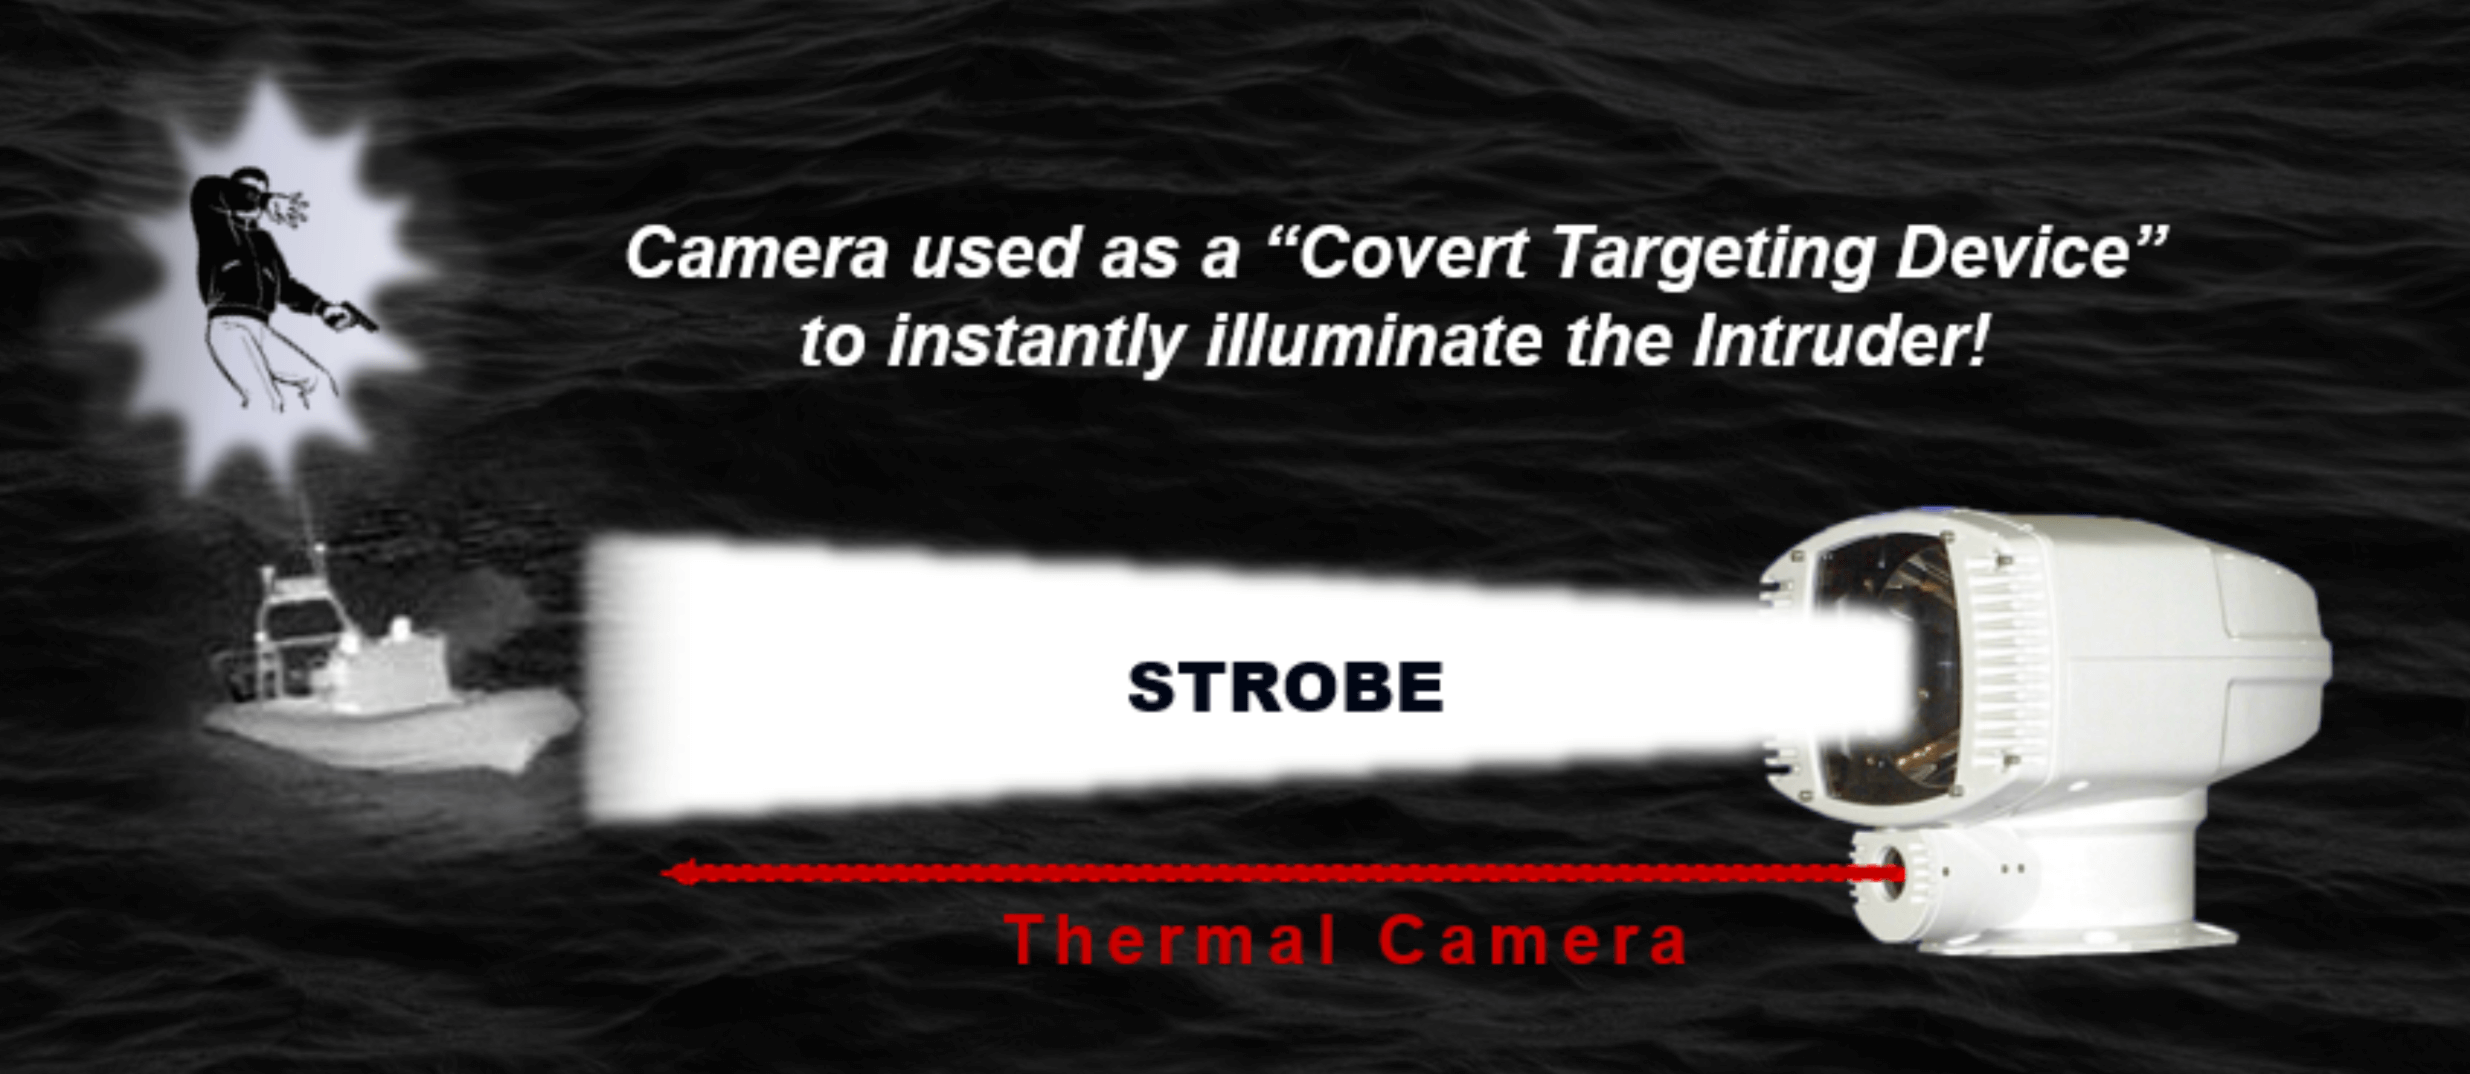 Thermal camera used as a covert targeting device to instantly illuminate the intruder